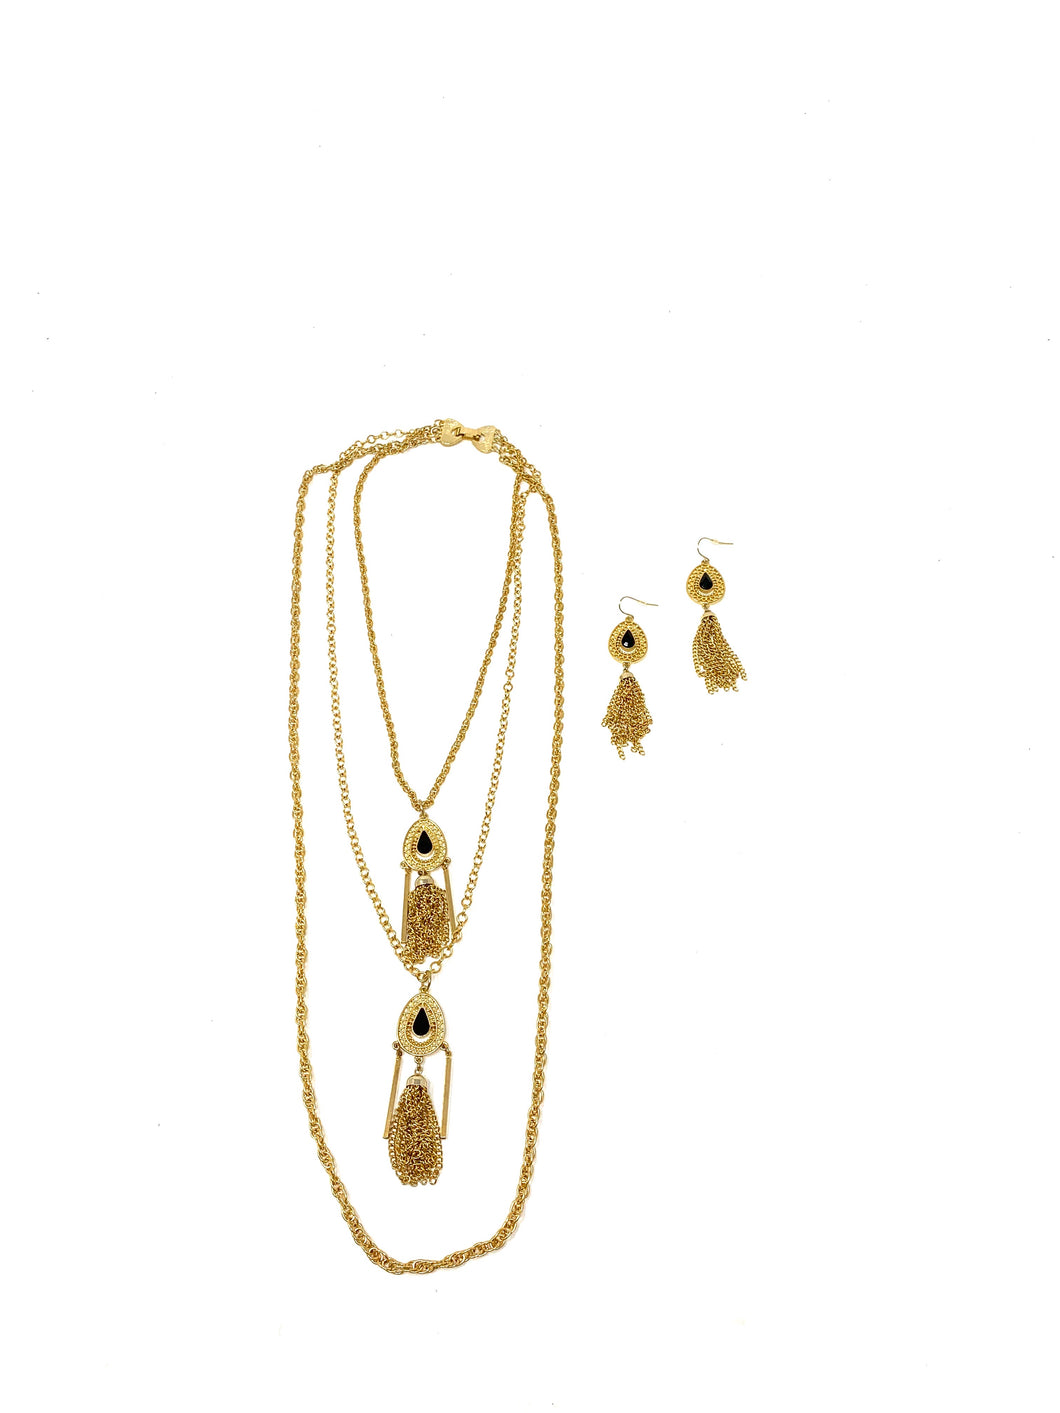 Egyptian Tassel Necklace and Earring Set